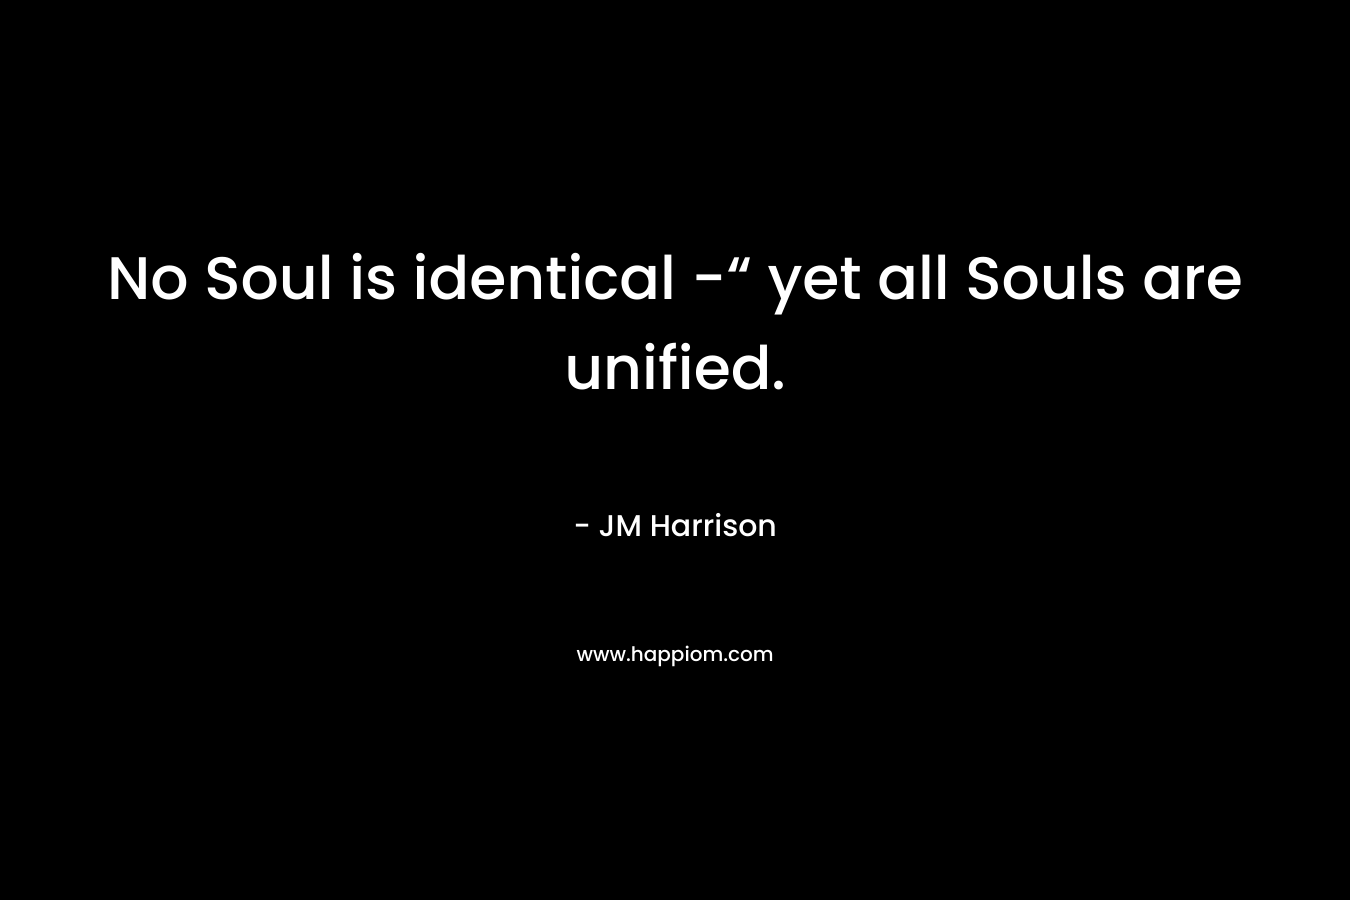 No Soul is identical -“ yet all Souls are unified.